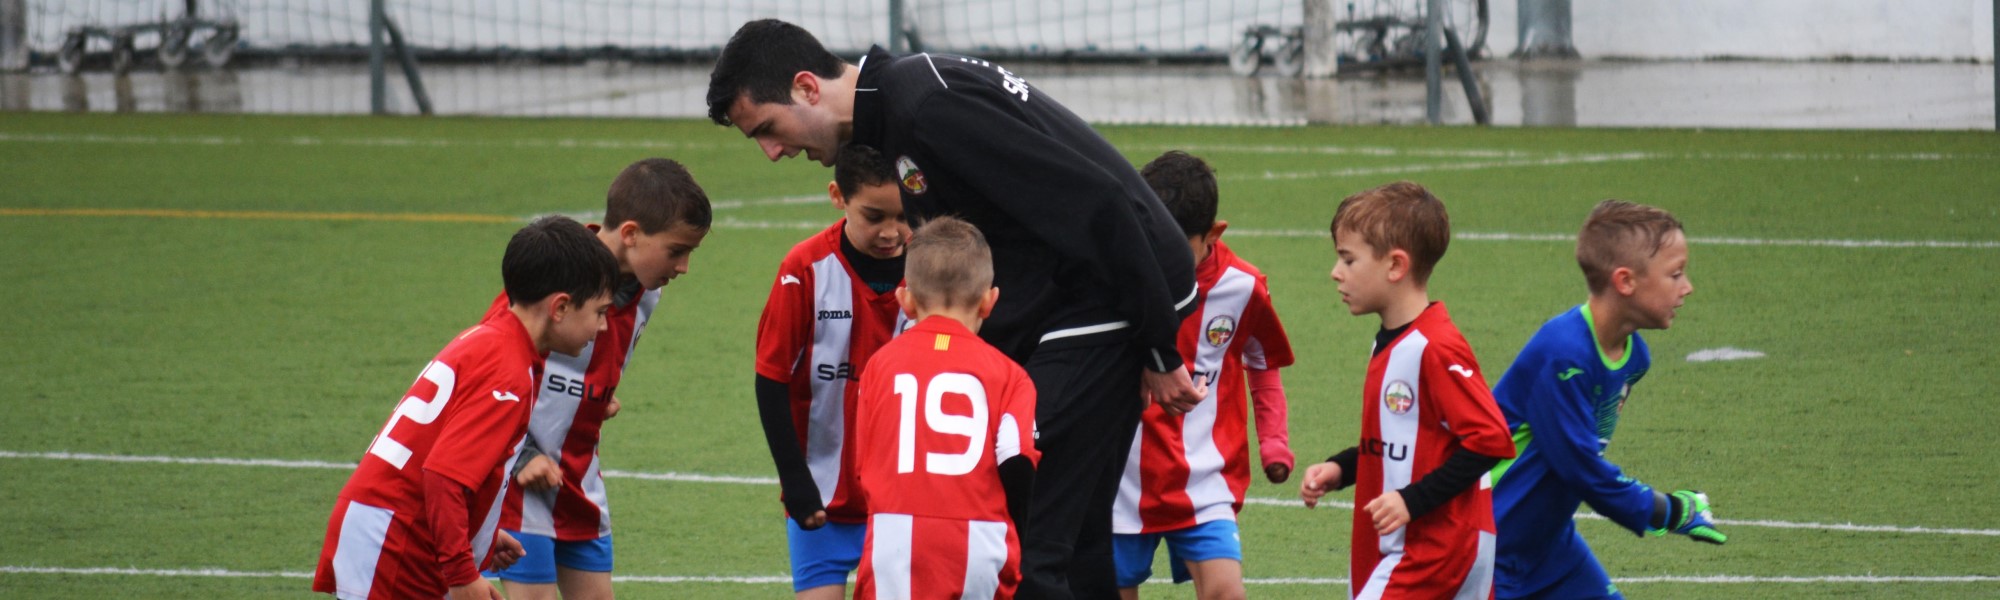 male coach helping young boys play soccer